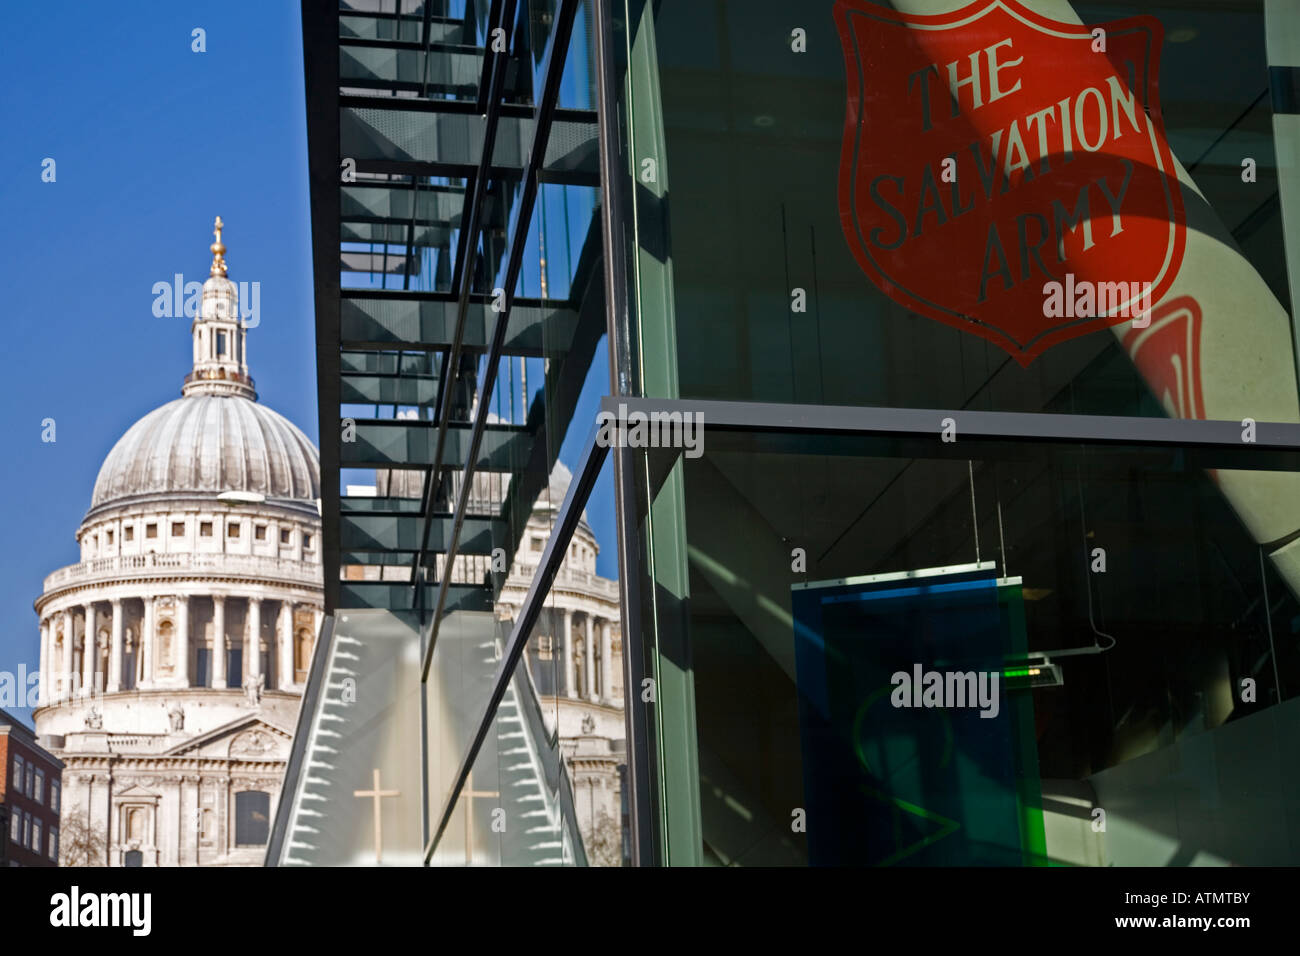 St Pauls Cathedral Salvation Army International Headquarter Building London England Stock Photo